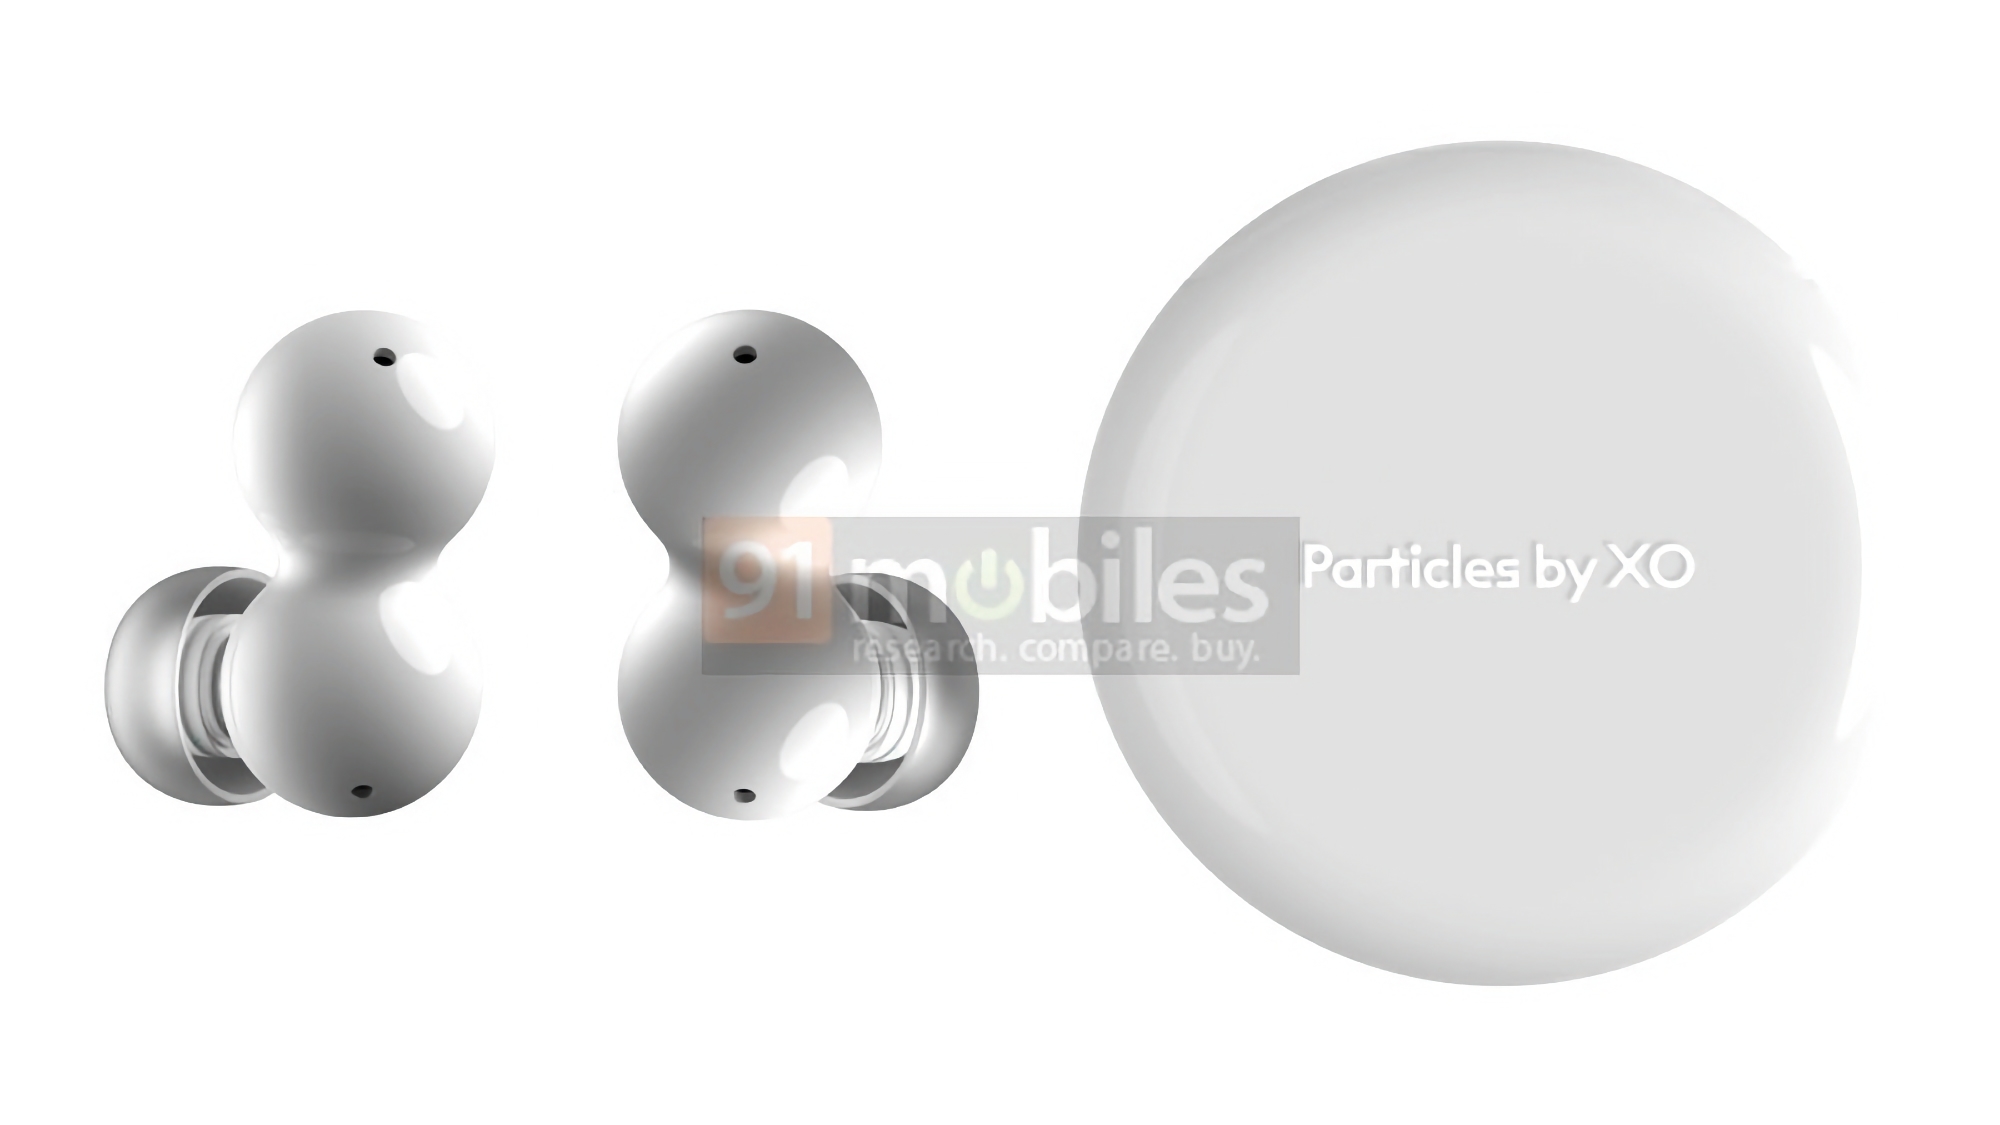 Unexpectedly! Nothing is going to launch a sub-brand Particles by XO and is preparing to release unusual TWS headphones